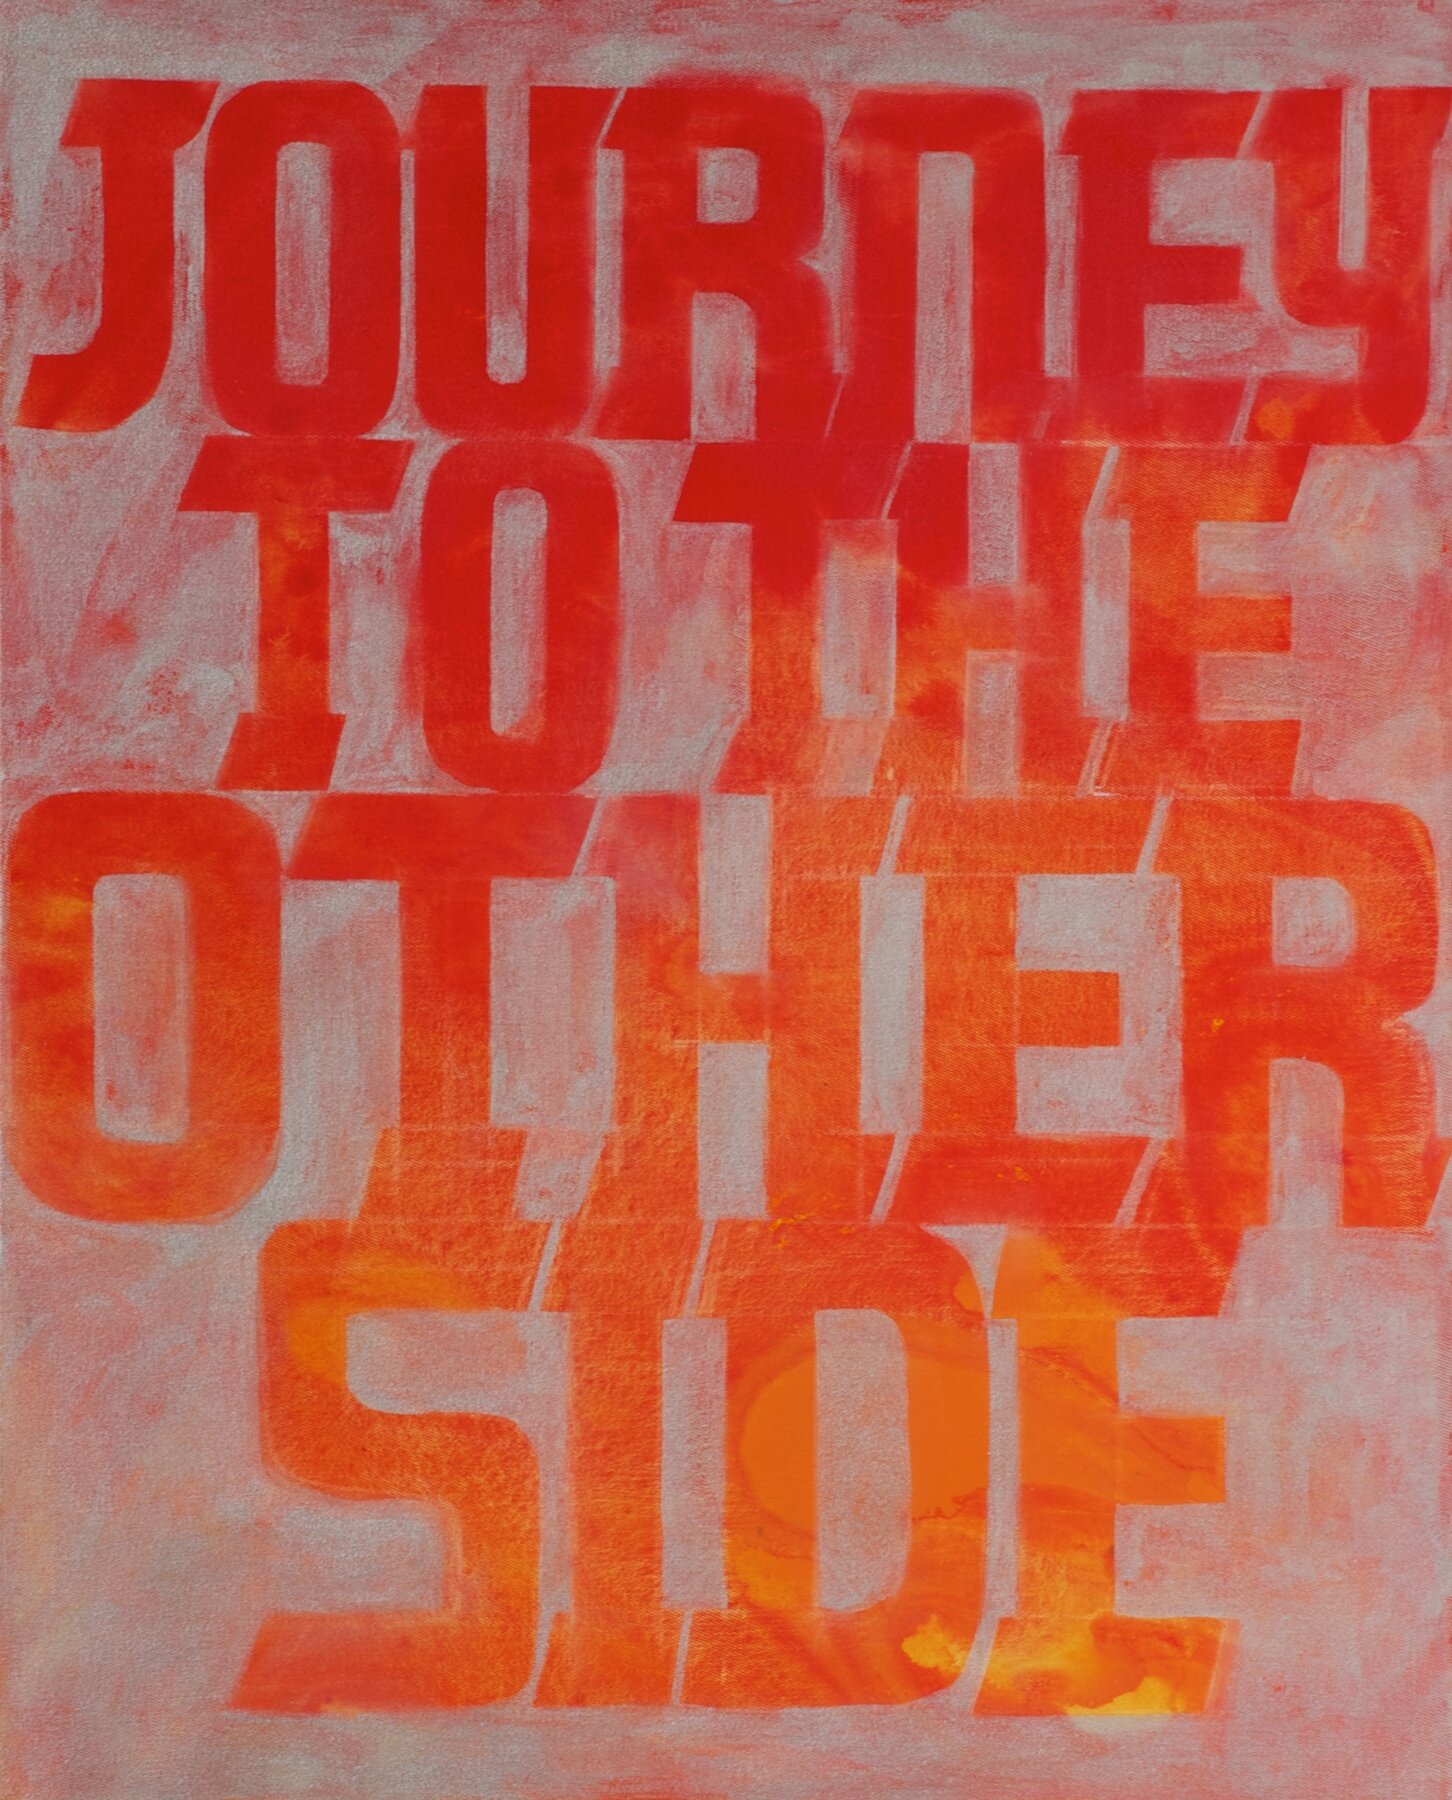 Journey to the Other Side